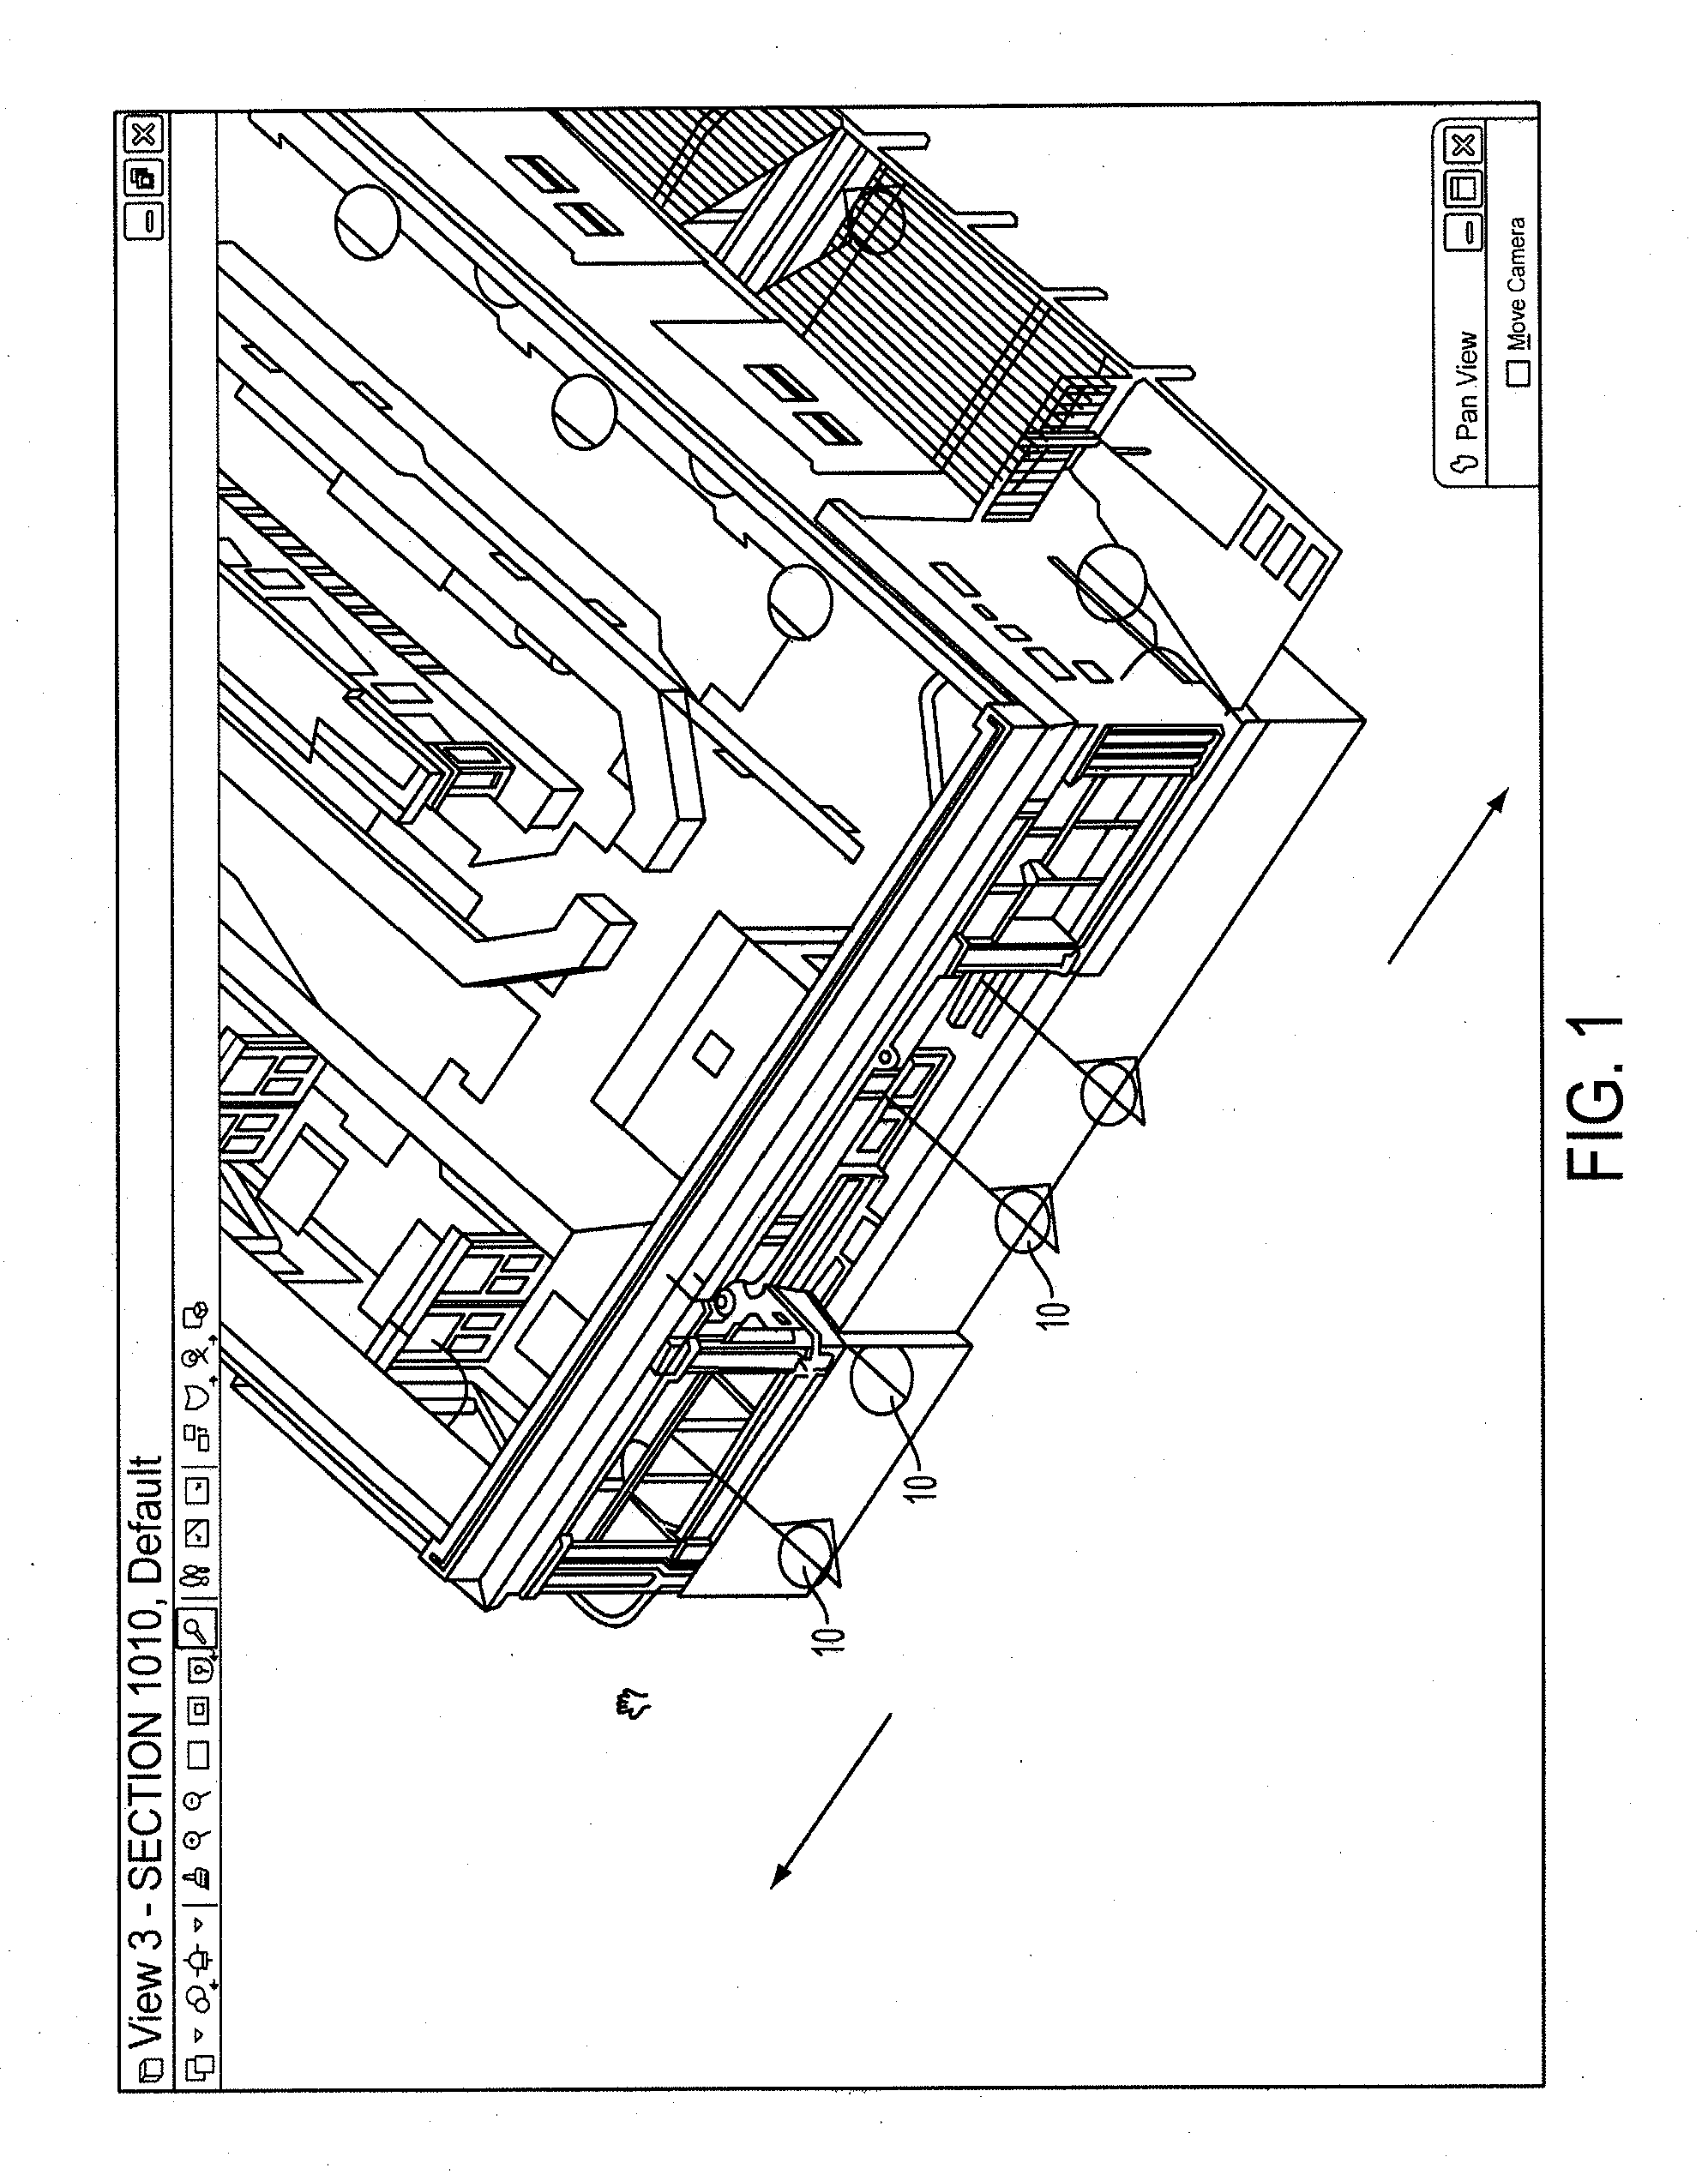 Multi-dimensional artifact assemblage for intrastructural and other assets with interface node mediators